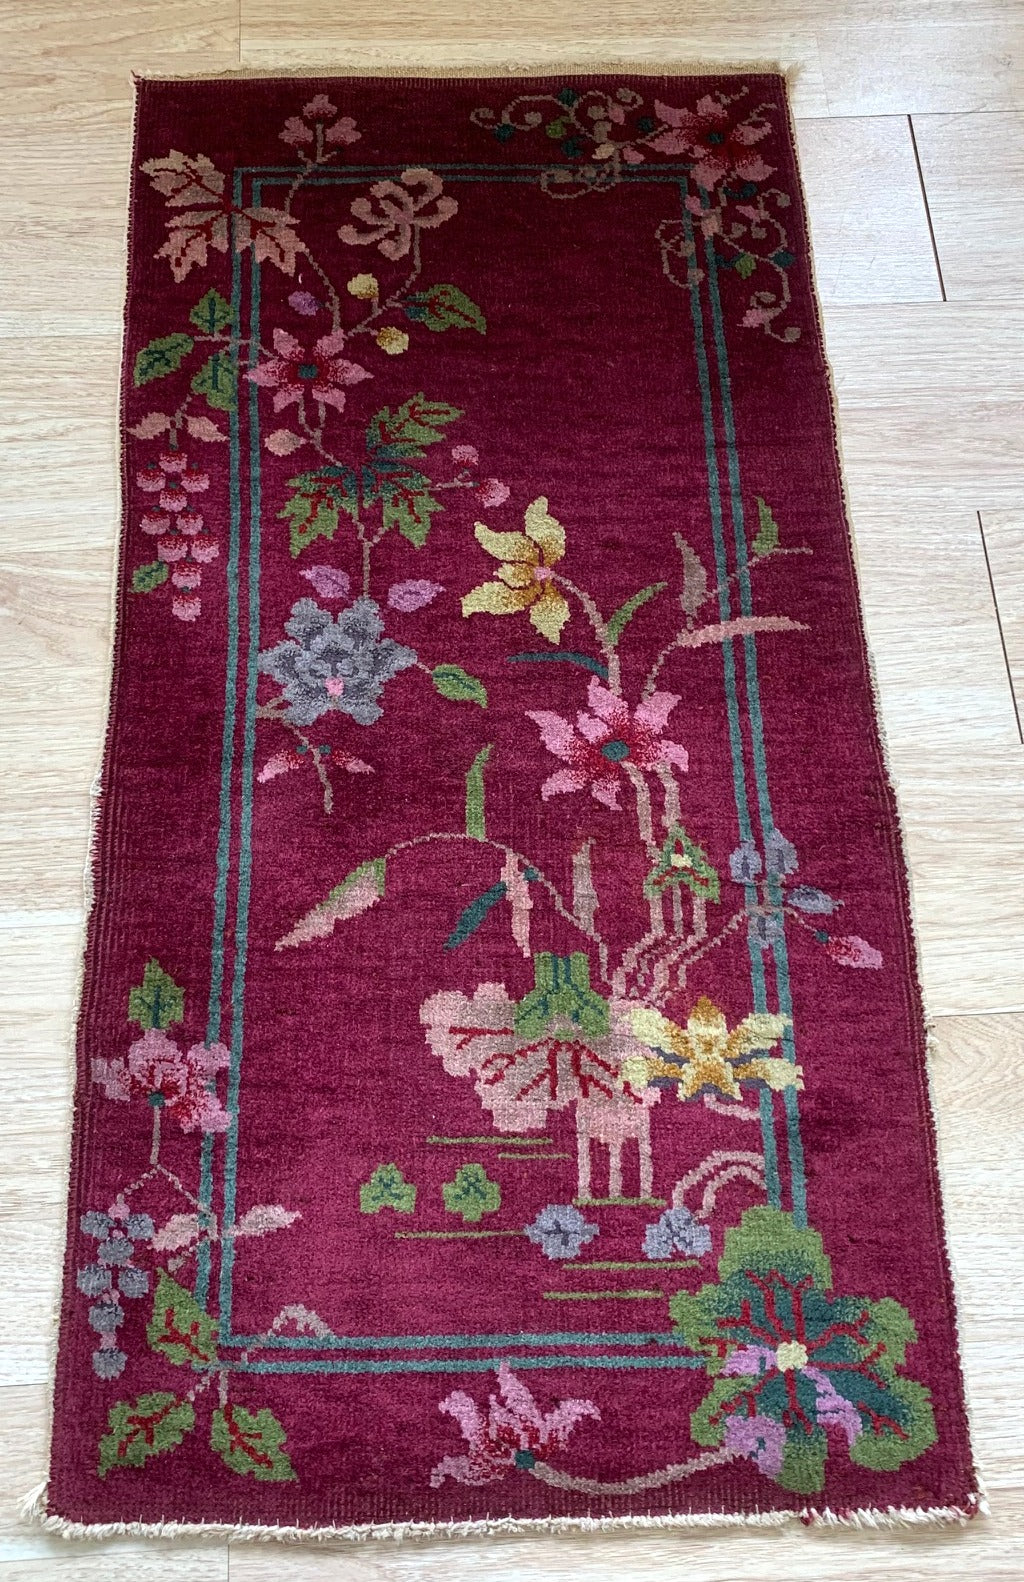 Handmade antique Art Deco Chinese rug in burgundy color. The rug is from the beginning of 20th century in original good condition.